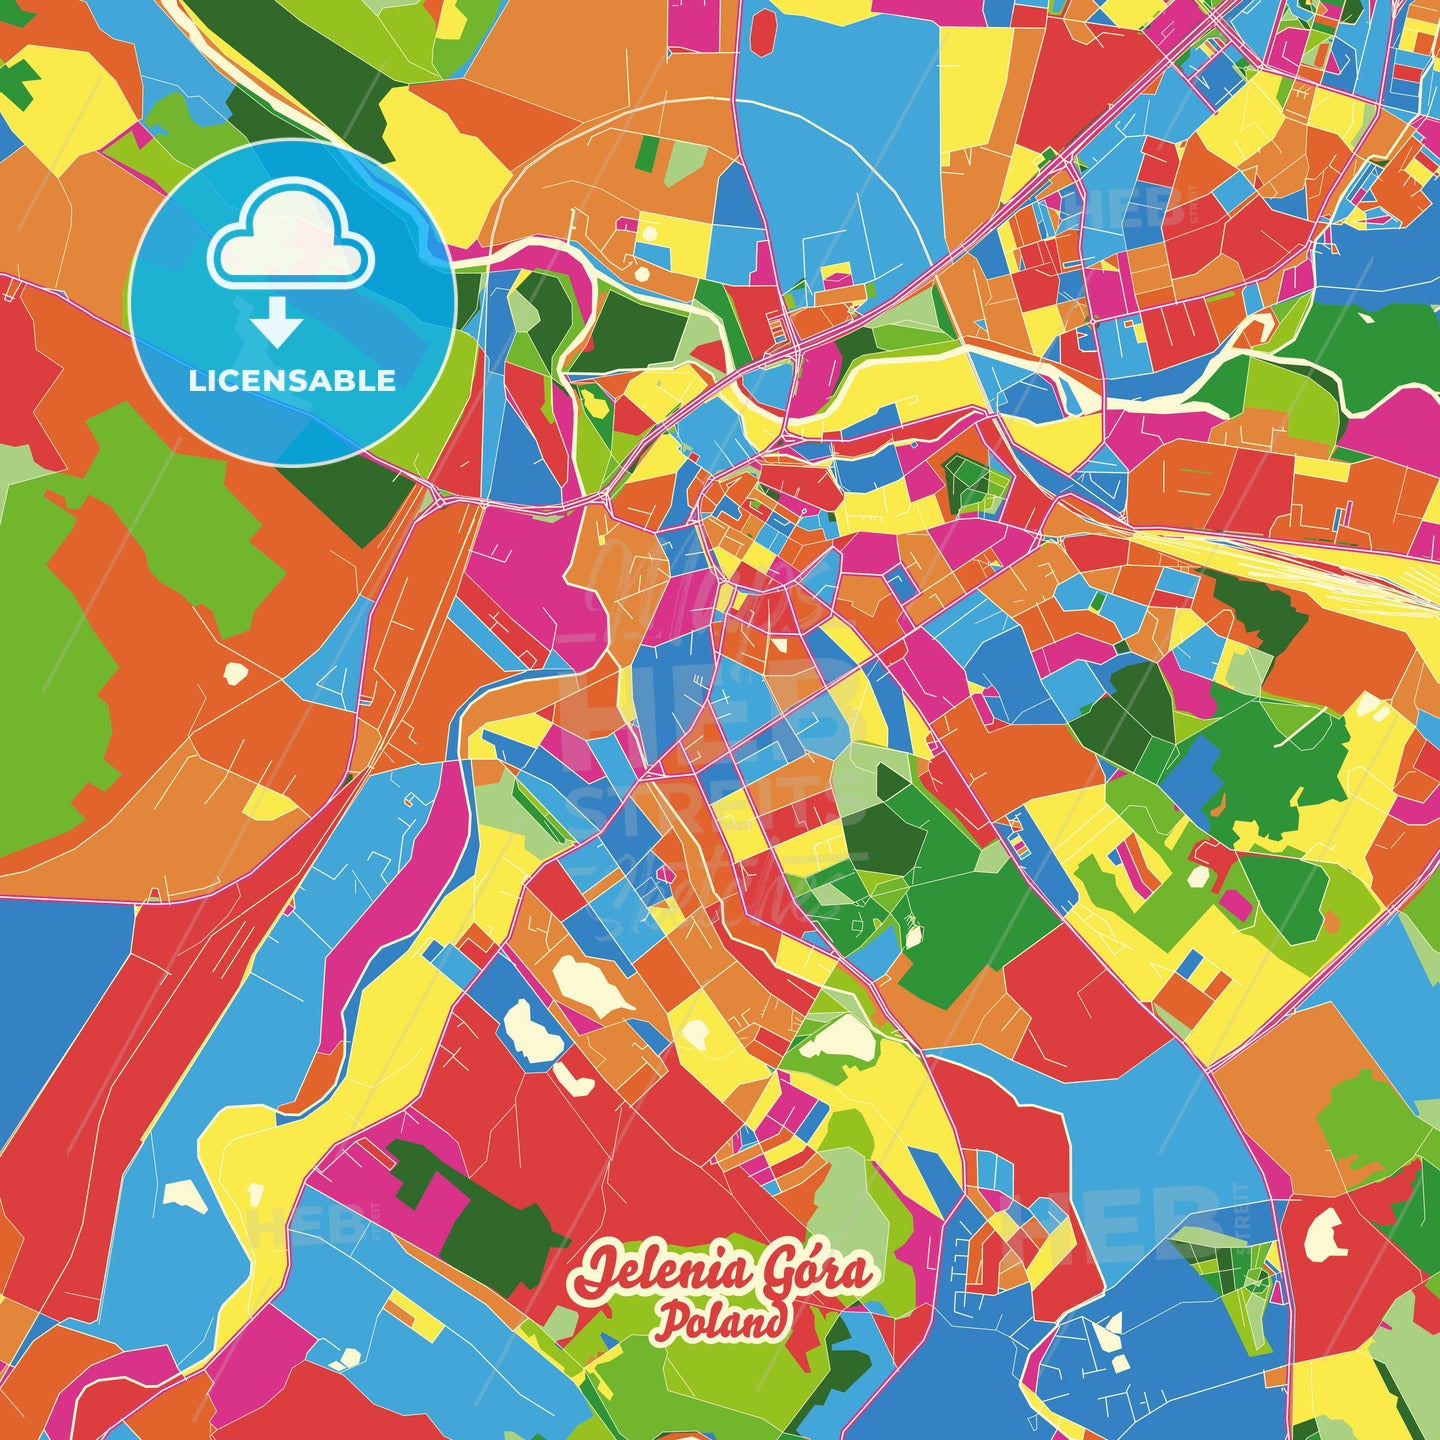 Jelenia Góra, Poland Crazy Colorful Street Map Poster Template - HEBSTREITS Sketches